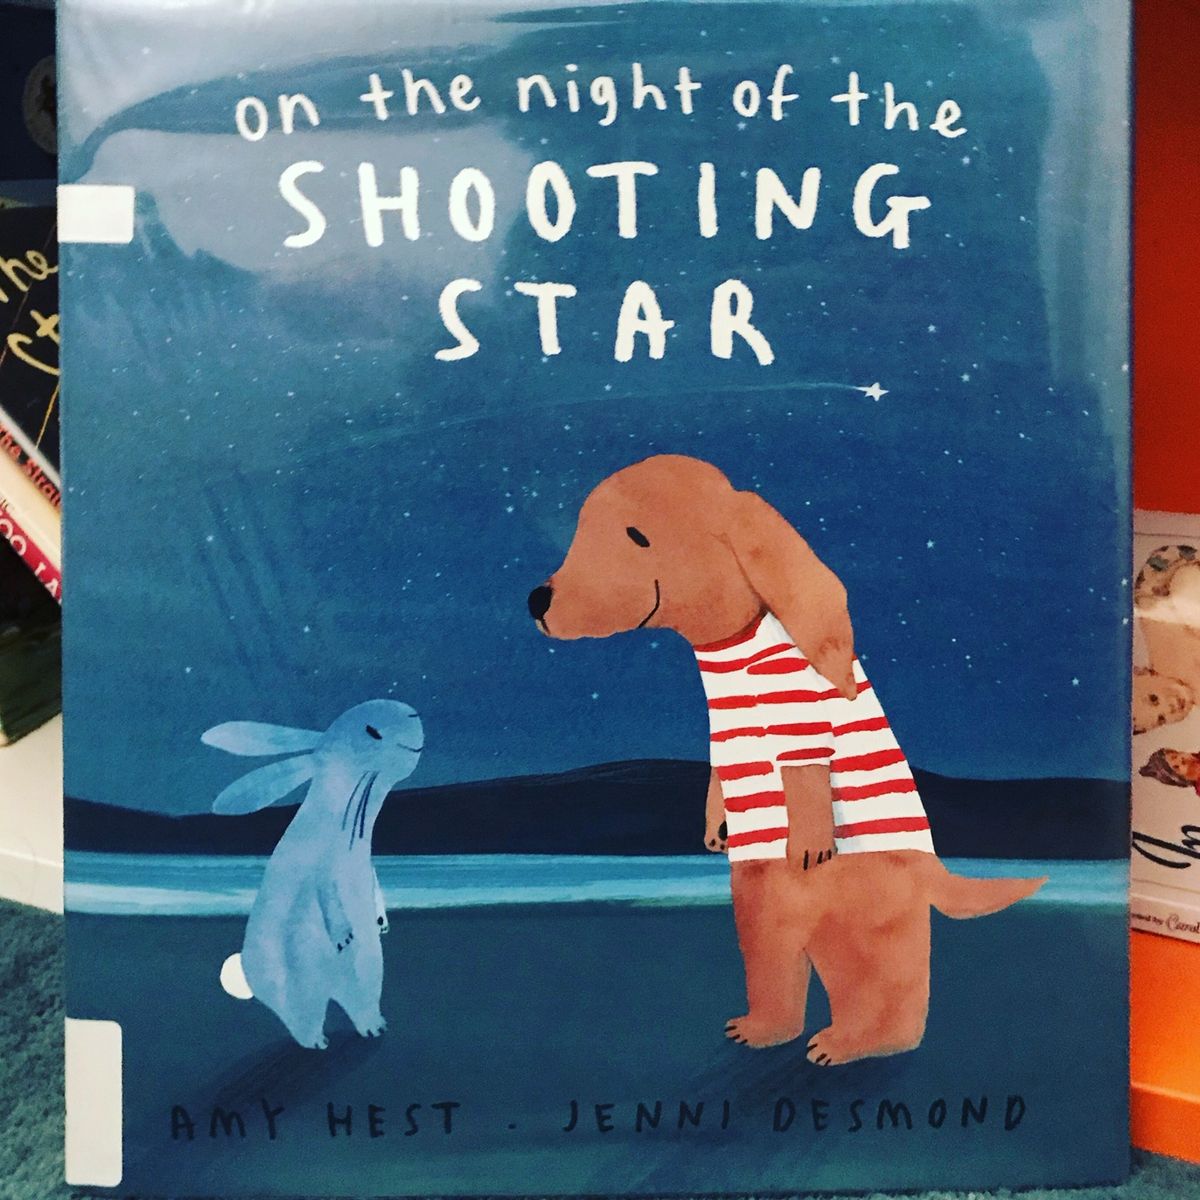 On The Night of the Shooting Star by Amy Hest & Jenni Desmond